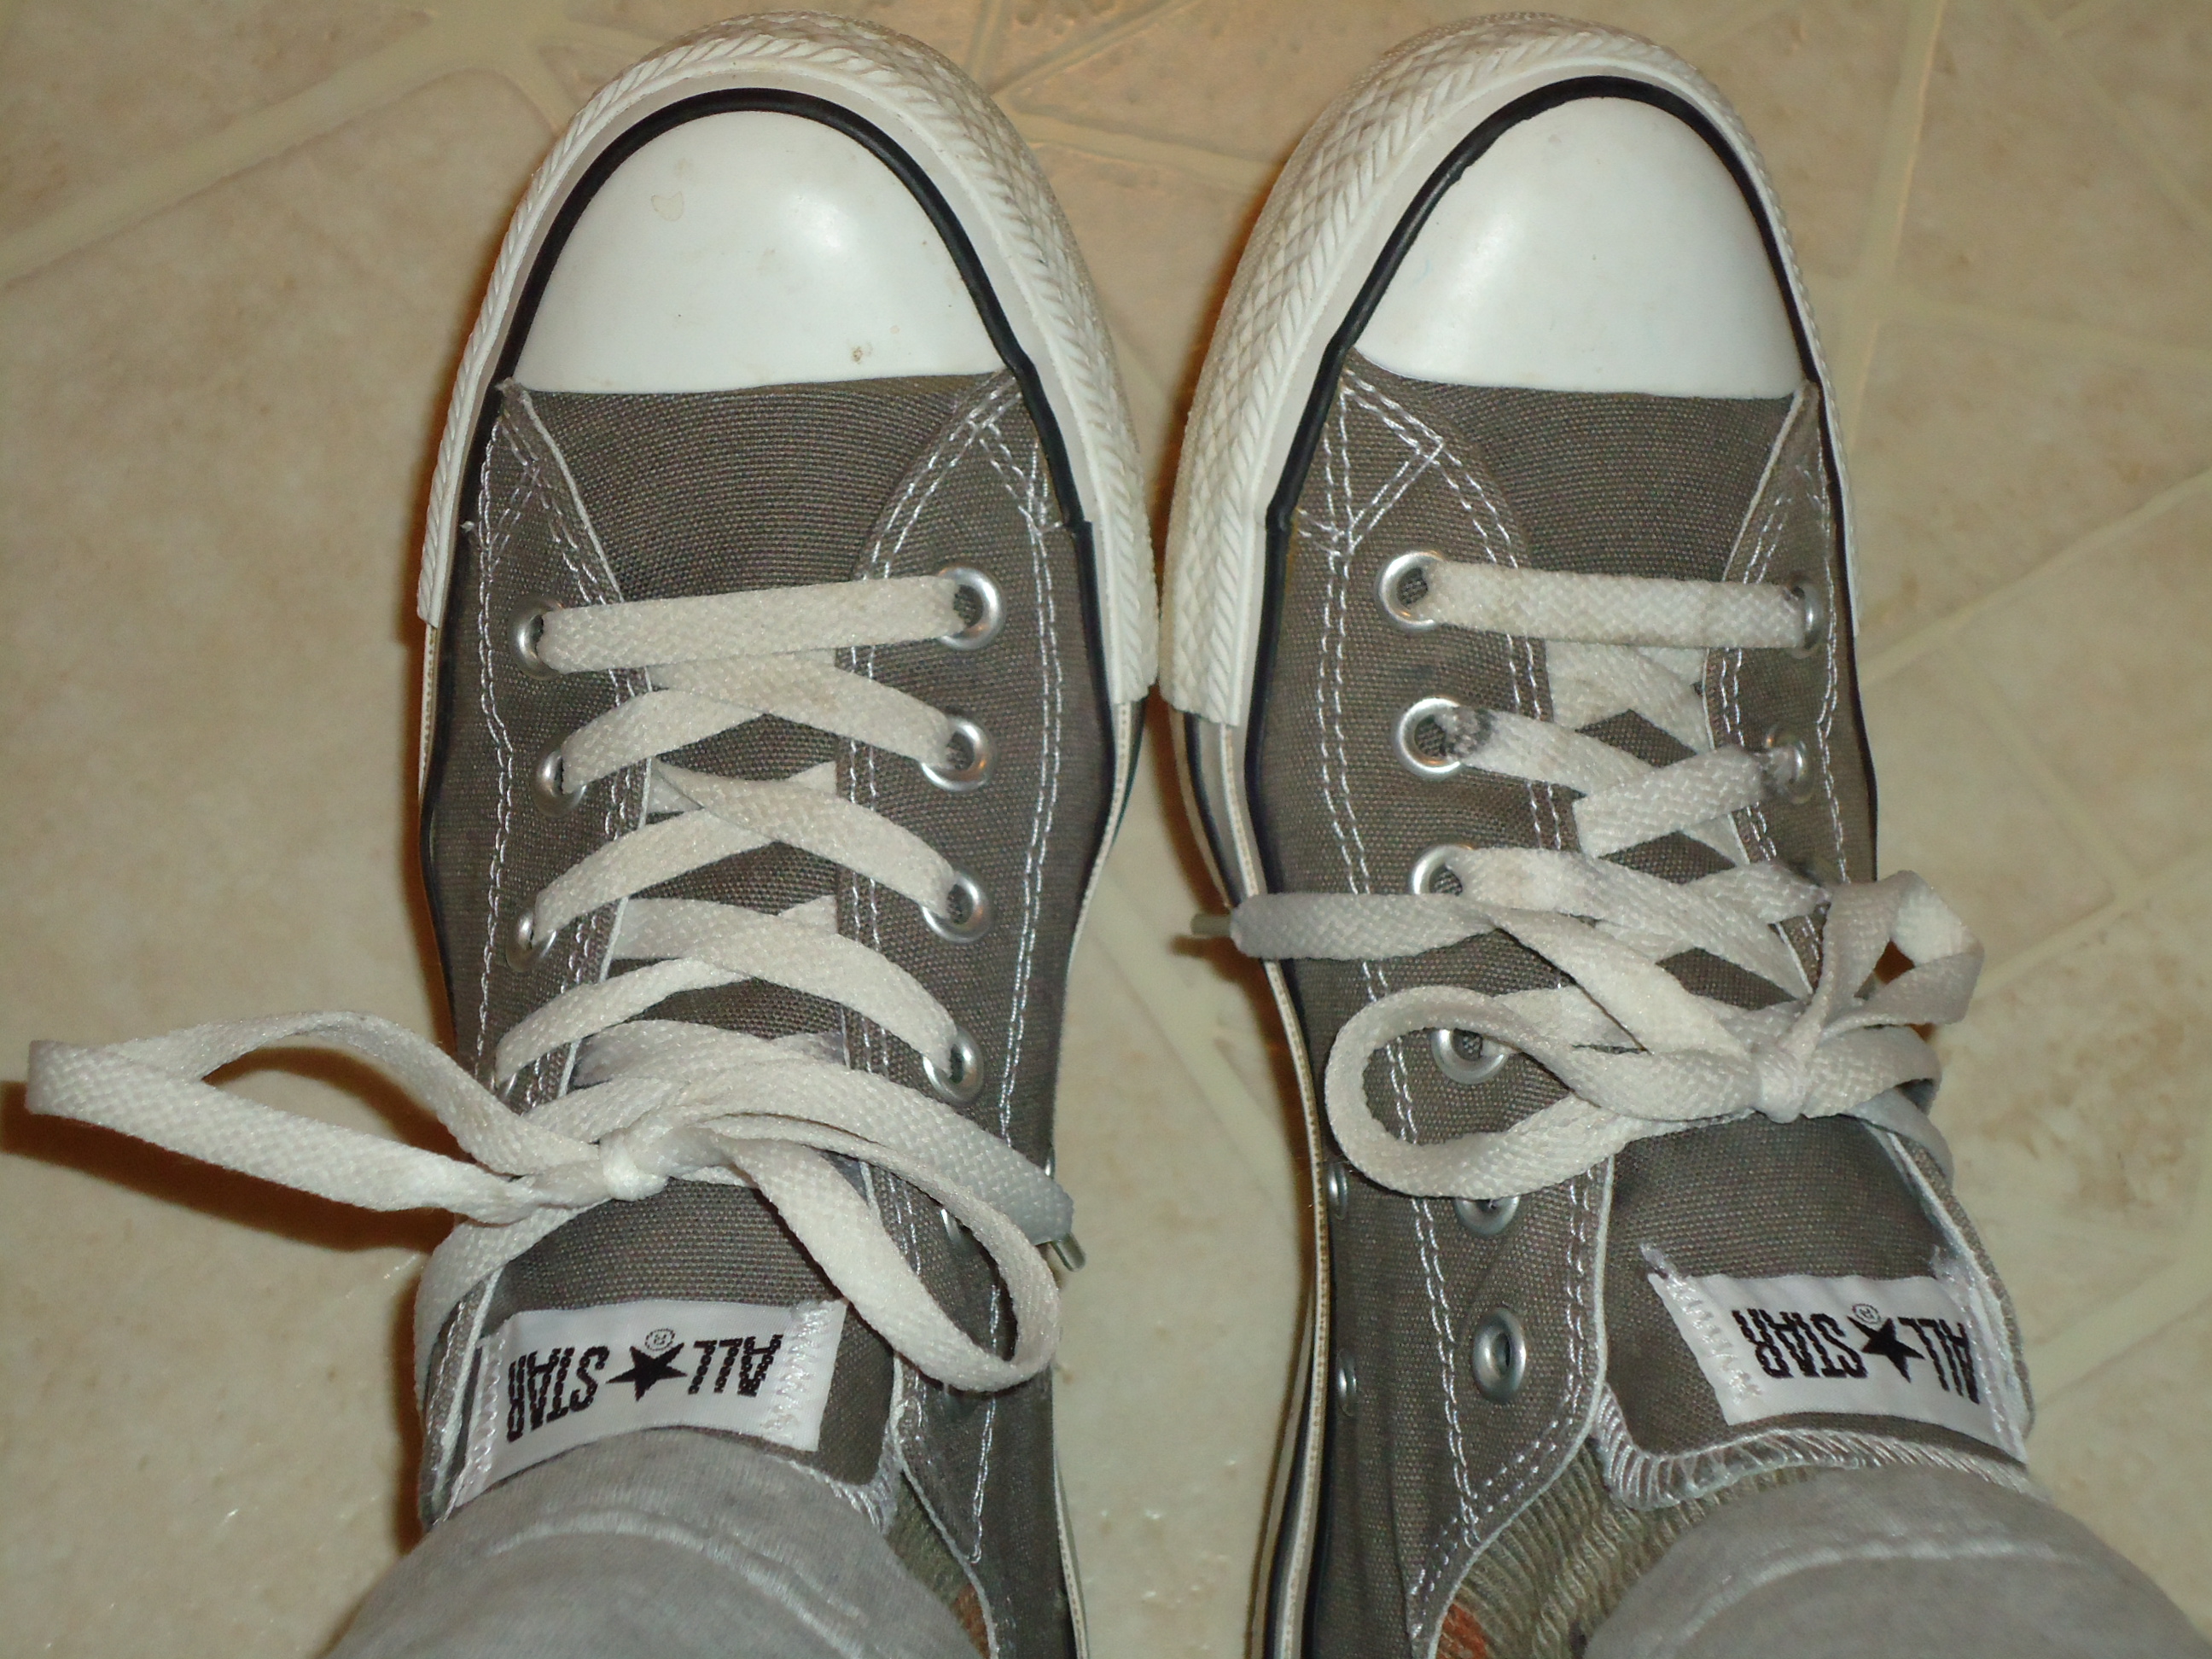 how long are shoelaces for converse low tops